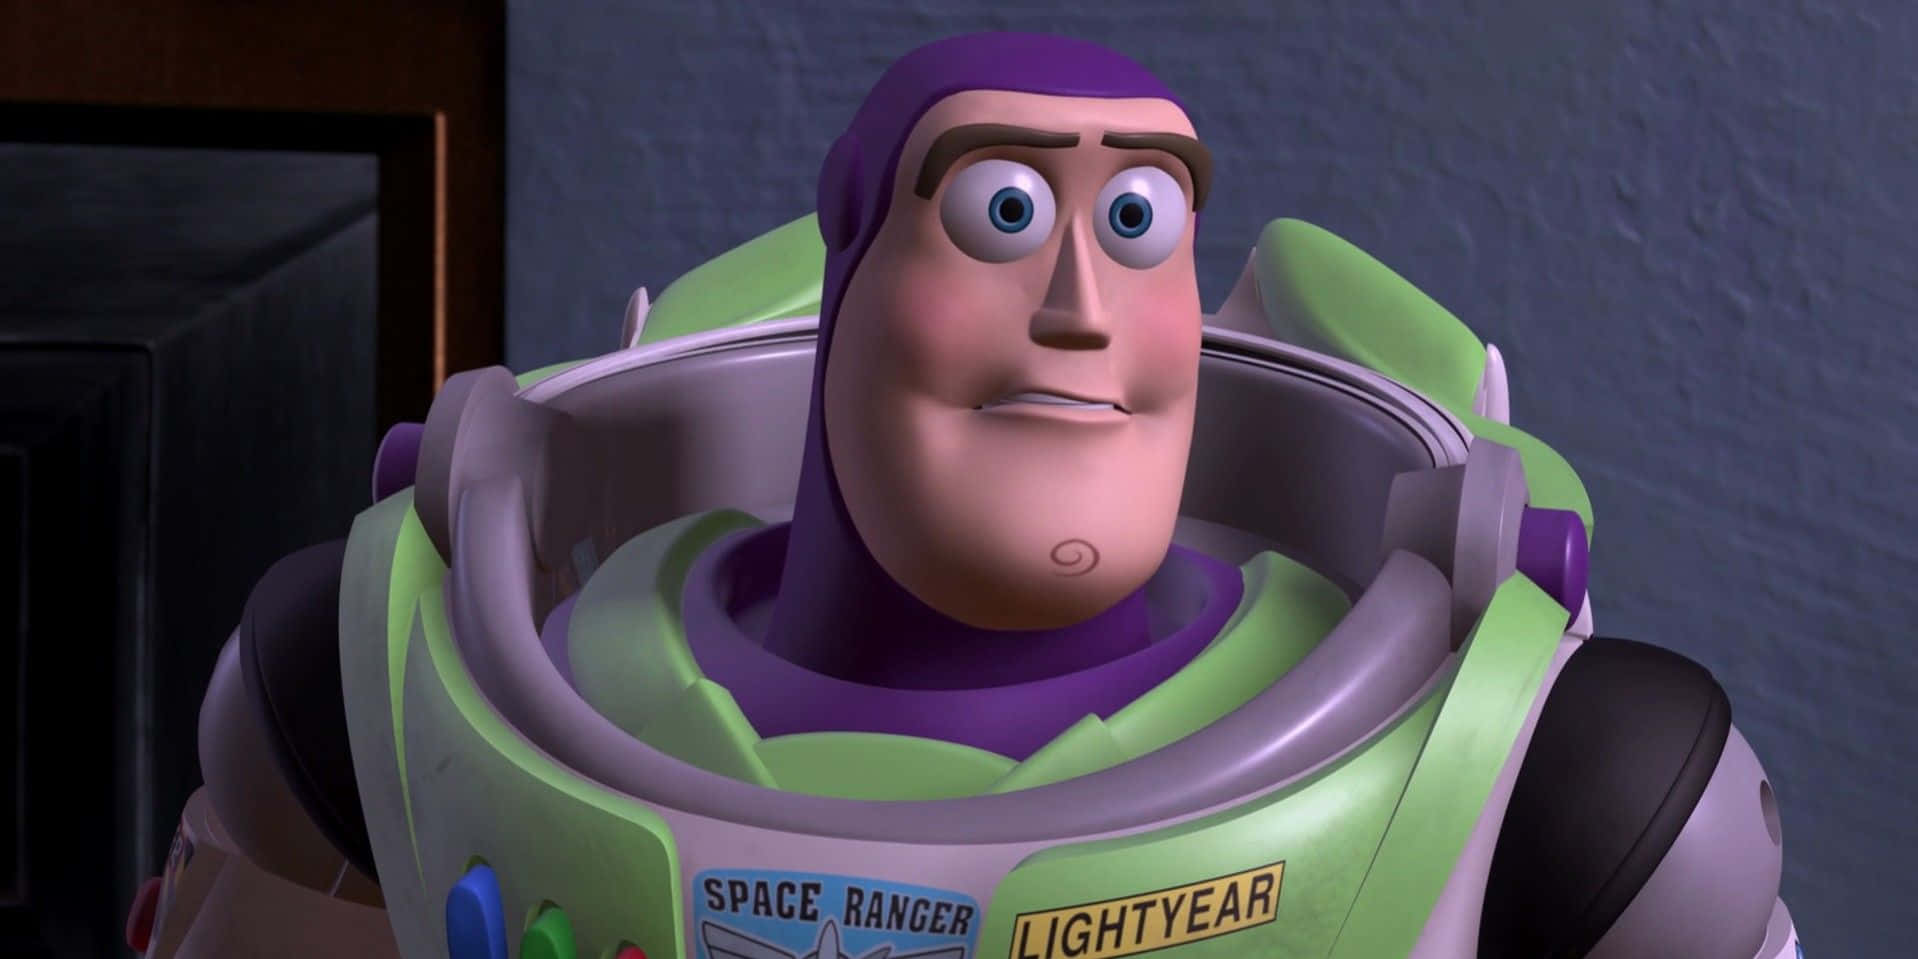 "To infinity, and beyond!"